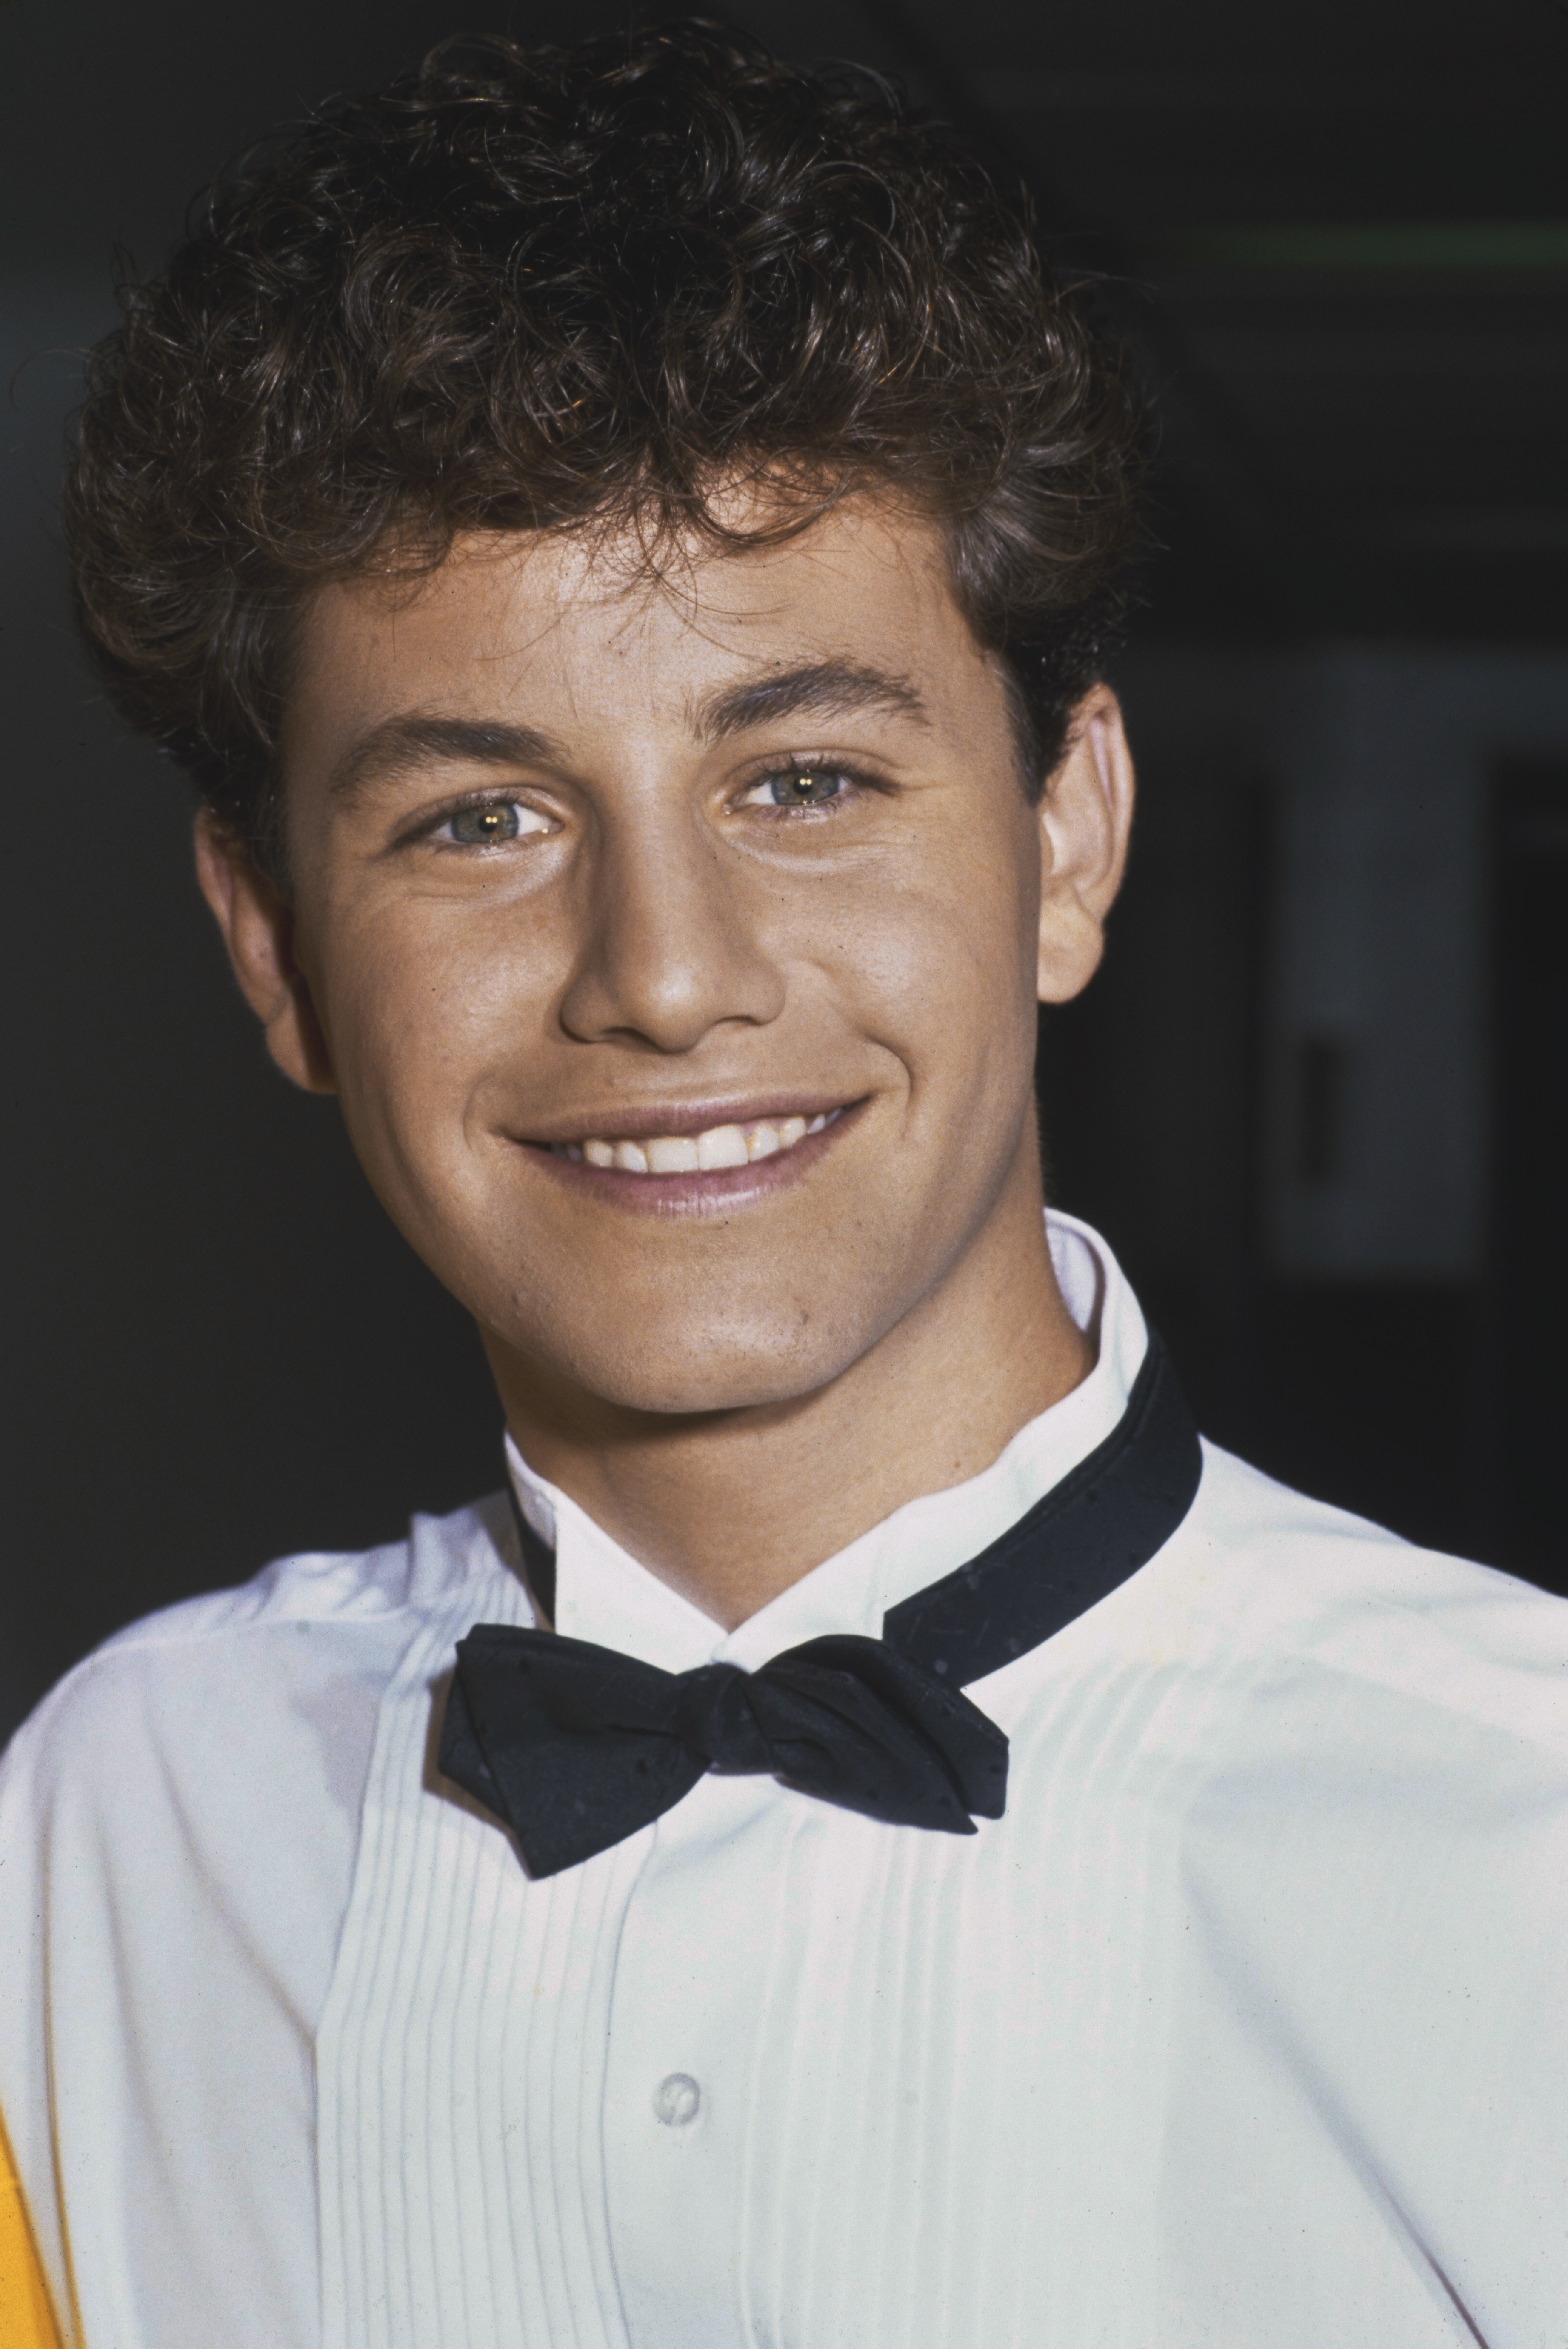 Kirk Cameron on September 16, 1989 | Source: Getty Images